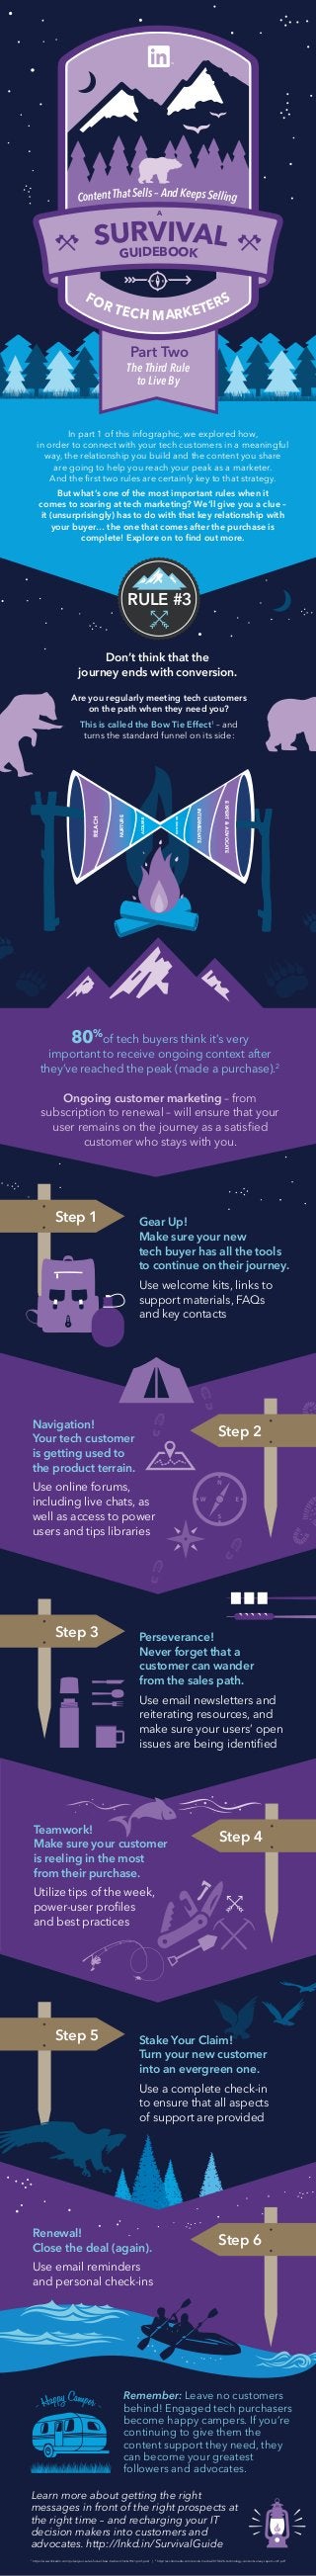 FOR TECH MARKETERS
In part 1 of this infographic, we explored how,
in order to connect with your tech customers in a meaningful
way, the relationship you build and the content you share
are going to help you reach your peak as a marketer.
And the ﬁrst two rules are certainly key to that strategy.
But what’s one of the most important rules when it
comes to soaring at tech marketing? We’ll give you a clue –
it (unsurprisingly) has to do with that key relationship with
your buyer… the one that comes after the purchase is
complete! Explore on to ﬁnd out more.
Don’t think that the
journey ends with conversion.
The most effective content is:
Are you regularly meeting tech customers
on the path when they need you?
This is called the Bow Tie Effect1
– and
turns the standard funnel on its side:
SURVIVALGUIDEBOOK
Part Two
Content That Sells – And Keeps Selling
A
The Third Rule
to Live By
RULE #3
80%
of tech buyers think it’s very
important to receive ongoing context after
they’ve reached the peak (made a purchase).2
Ongoing customer marketing – from
subscription to renewal – will ensure that your
user remains on the journey as a satisﬁed
customer who stays with you.
Gear Up!
Make sure your new
tech buyer has all the tools
to continue on their journey.
Use welcome kits, links to
support materials, FAQs
and key contacts
Navigation!
Your tech customer
is getting used to
the product terrain.
Use online forums,
including live chats, as
well as access to power
users and tips libraries
REACH
NURTURE
ACQUIRE
EXPERT&ADVOCATE
INTERMEDIATE
BEGINNER
Step 1
Step 2
Perseverance!
Never forget that a
customer can wander
from the sales path.
Use email newsletters and
reiterating resources, and
make sure your users’ open
issues are being identiﬁed
Step 3
Teamwork!
Make sure your customer
is reeling in the most
from their purchase.
Utilize tips of the week,
power-user proﬁles
and best practices
Step 5
Renewal!
Close the deal (again).
Use email reminders
and personal check-ins
Remember: Leave no customers
behind! Engaged tech purchasers
become happy campers. If you’re
continuing to give them the
content support they need, they
can become your greatest
followers and advocates.
1
https://www.linkedin.com/pulse/your-sales-funnel-bow-tie-brent-hicks?trk=prof-post | 2
http://eccolomedia.com/eccolo-media-2015-b2b-technology-content-survey-report-vol1.pdf
Learn more about getting the right
messages in front of the right prospects at
the right time – and recharging your IT
decision makers into customers and
advocates. http://lnkd.in/SurvivalGuide
Step 4
Step 6
Stake Your Claim!
Turn your new customer
into an evergreen one.
Use a complete check-in
to ensure that all aspects
of support are provided
 